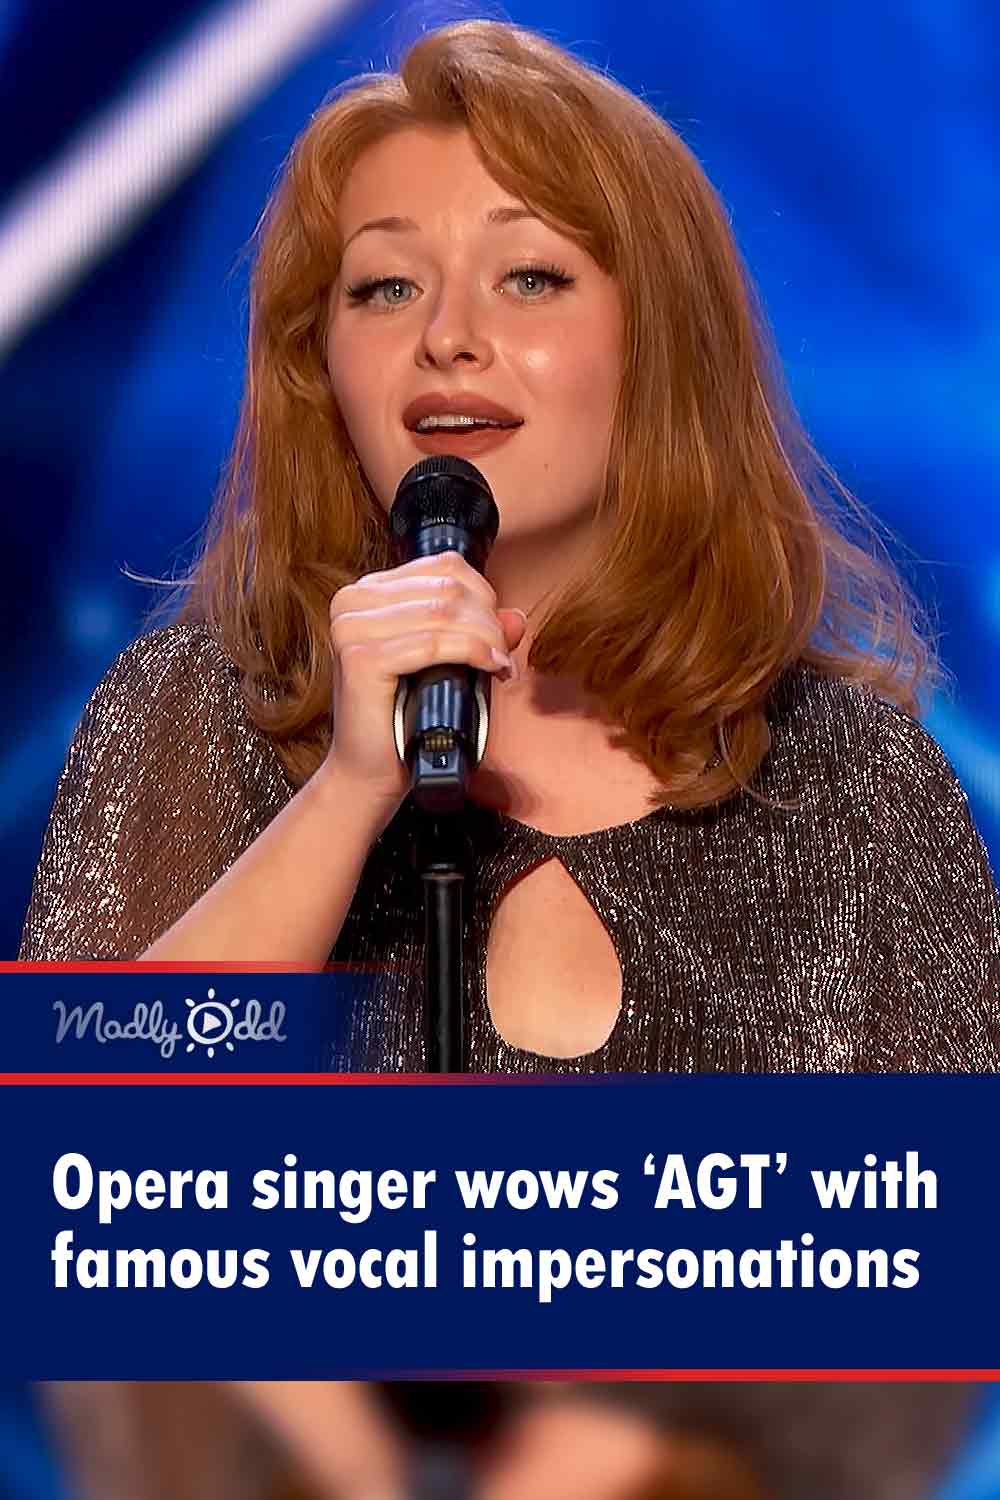 Opera singer wows ‘AGT’ with famous vocal impersonations